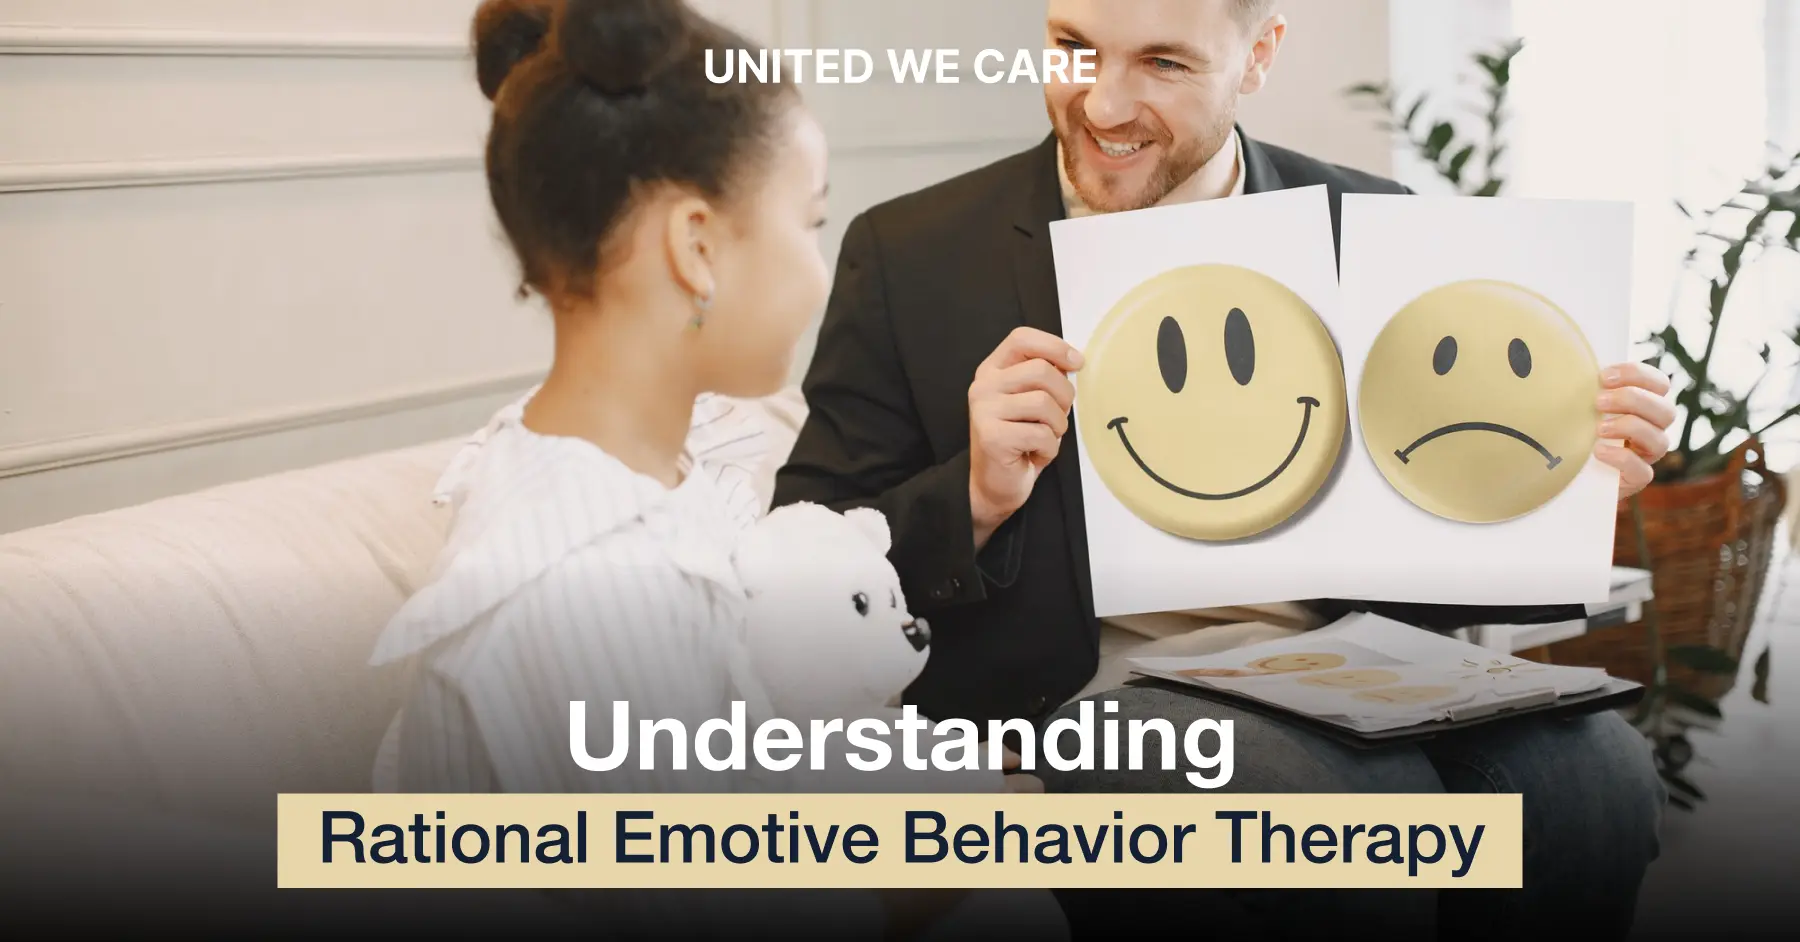 Rational Emotive Behavior Therapy: A Guide to Emotional Wellness